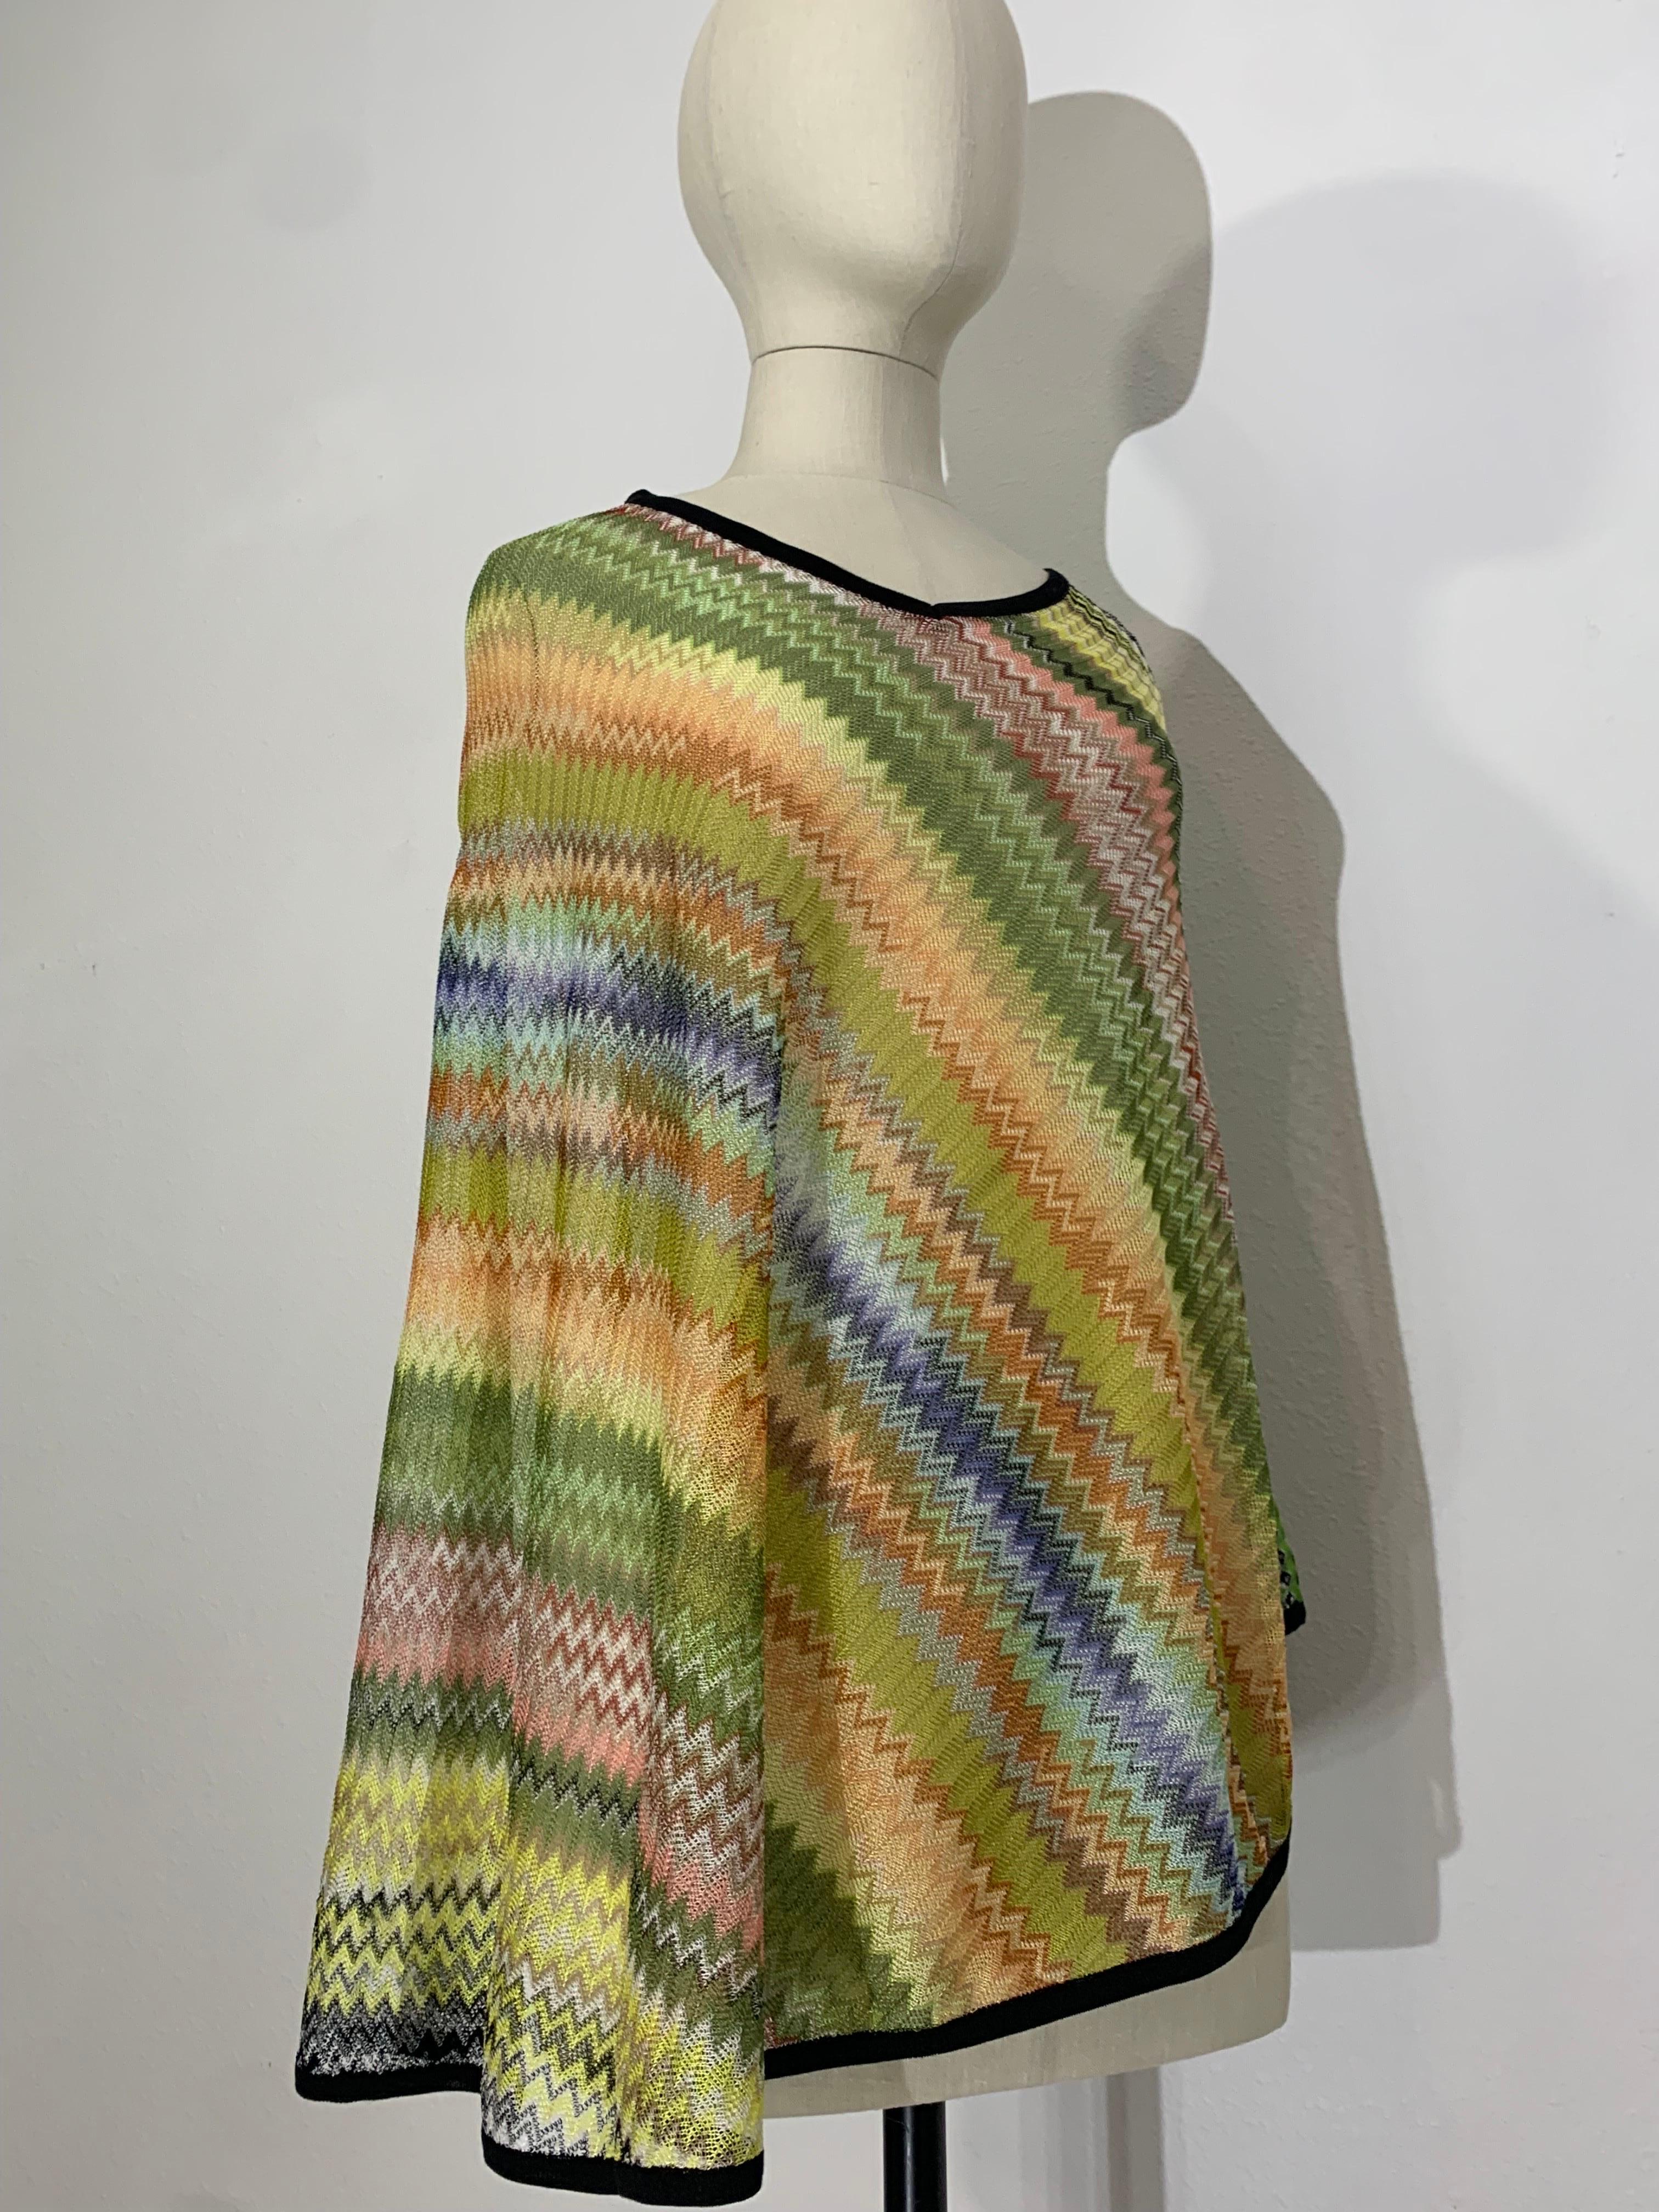 Missoni Spring/Summer Rayon & Cotton Knit Cover-Up in Classic Missoni Zig-Zag For Sale 2